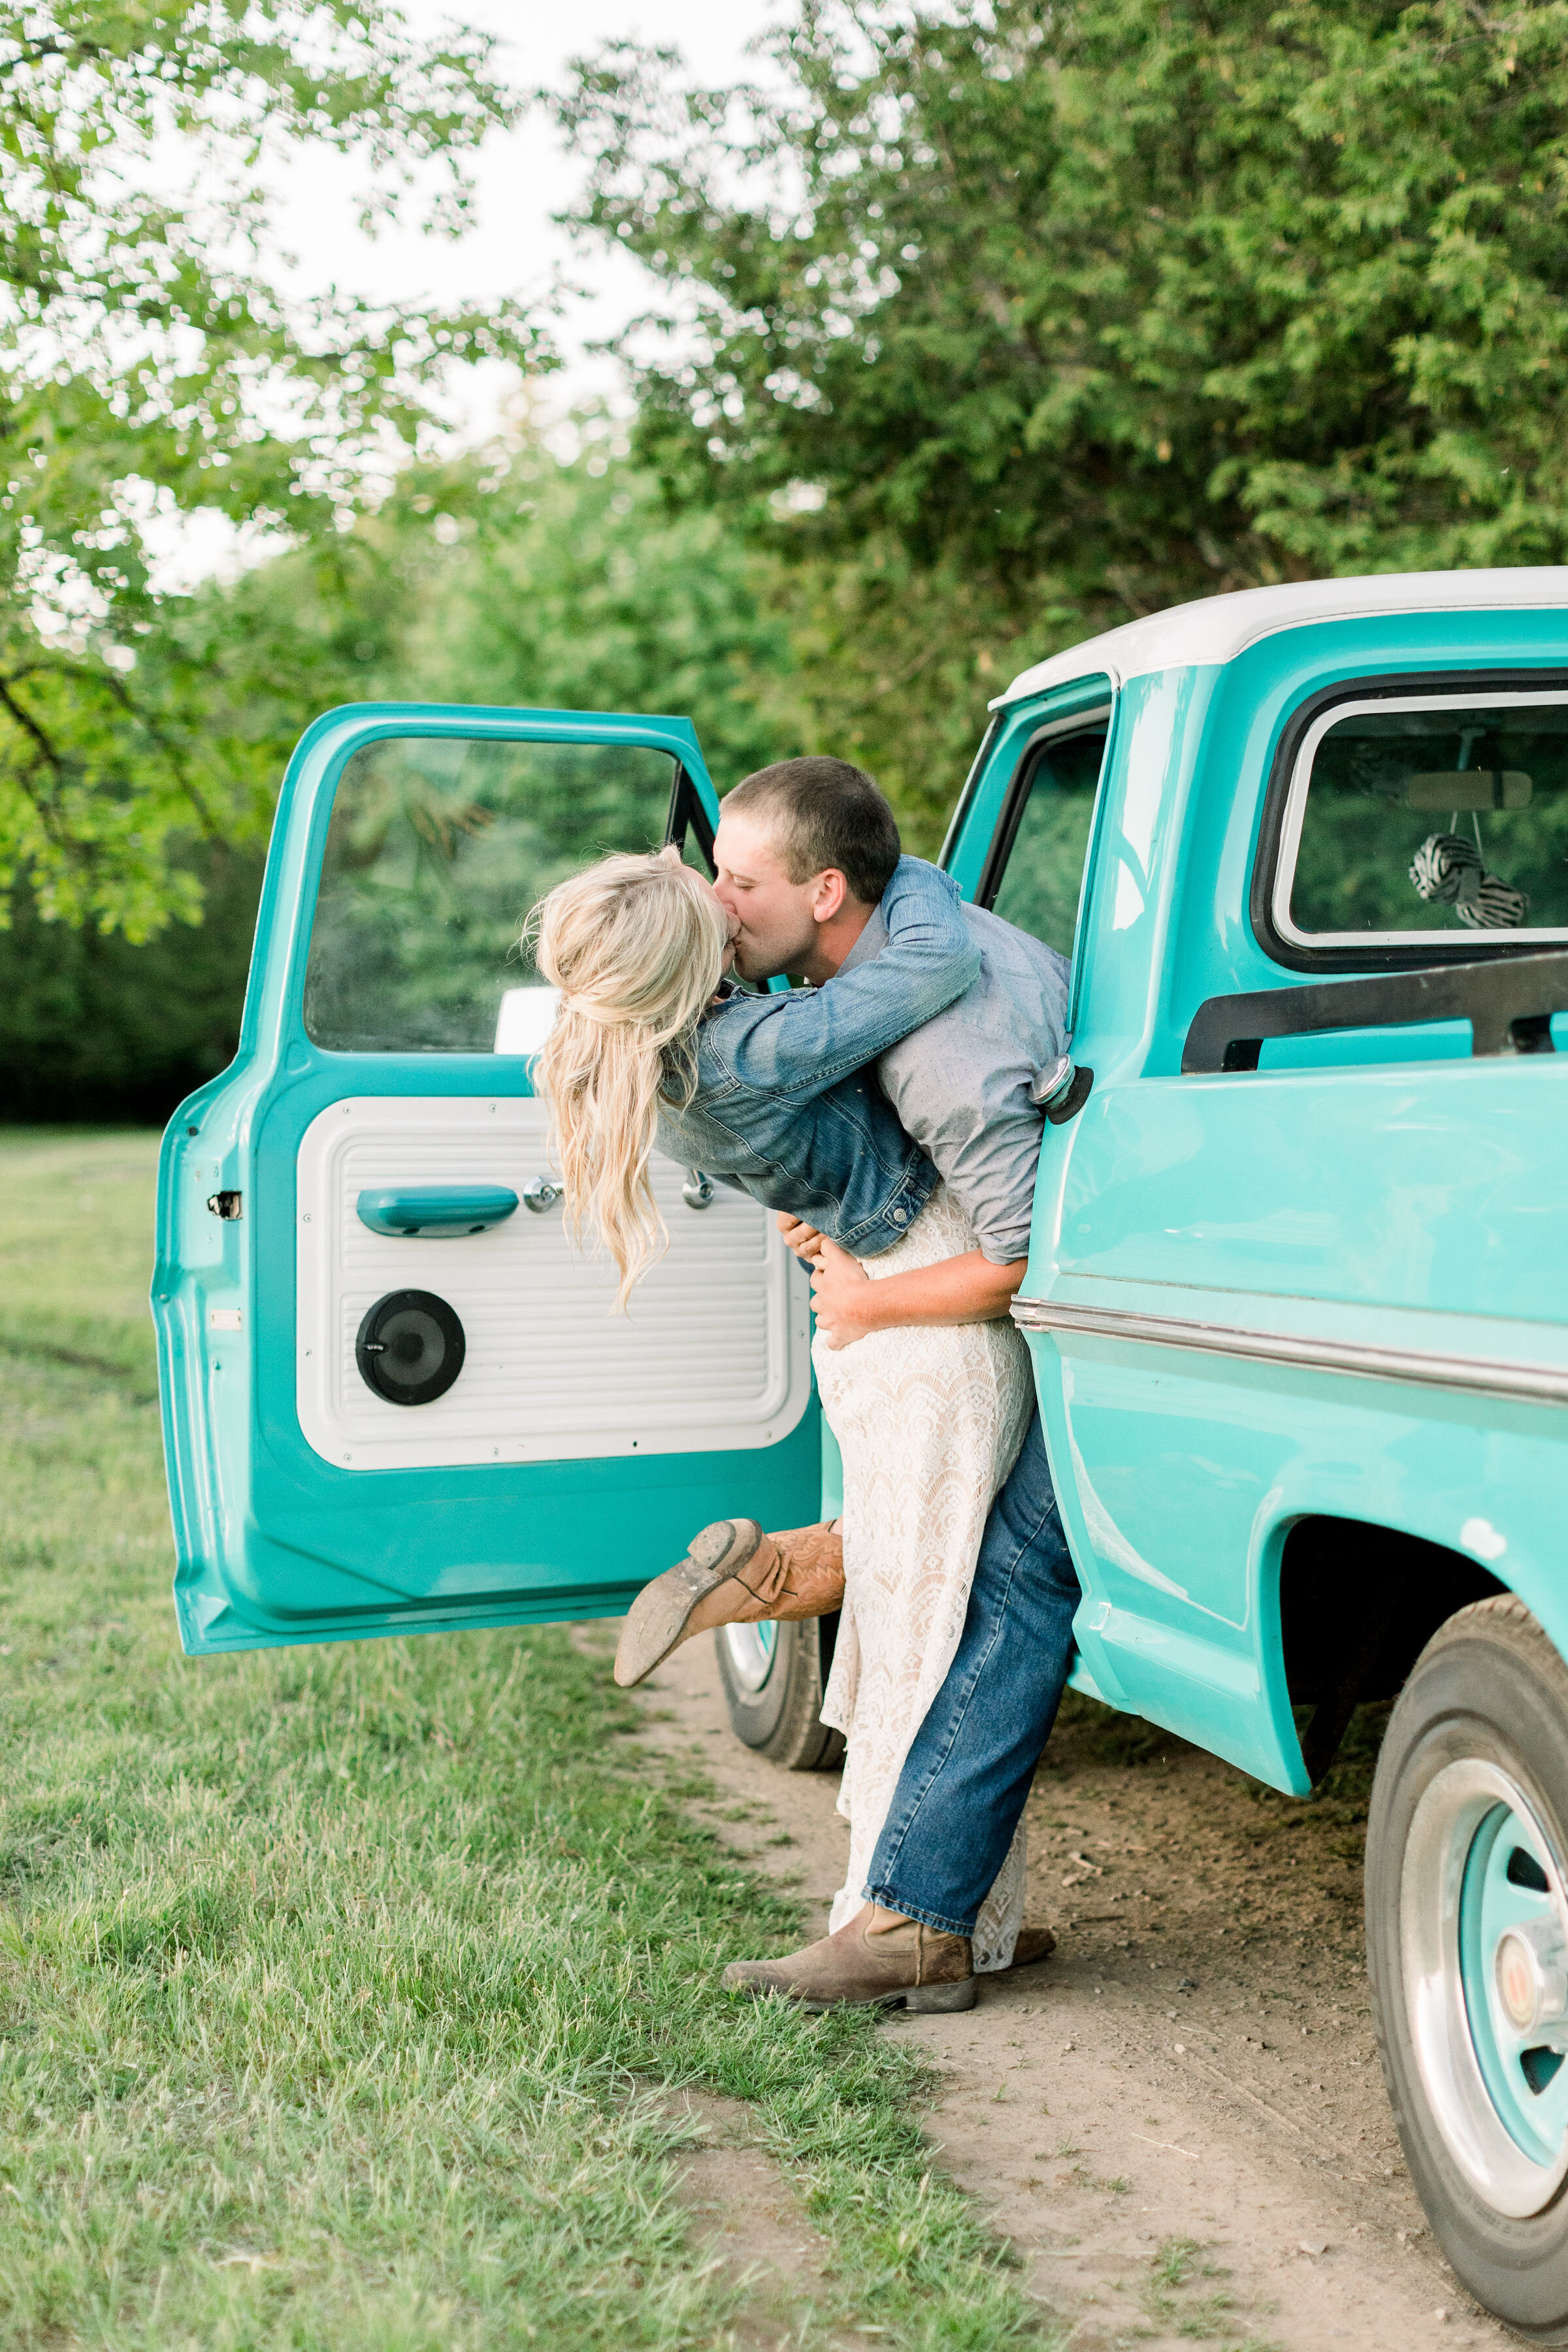  Leaning against this vintage Tiffany Blue pickup truck, Ottawa, Ontario couples photographer, Chelsea Mason Photography captures this couple leaning in for a passionate kiss. Tiffany blue vintage pickup truck mens cowboy hat #ChelseaMasonPhotography